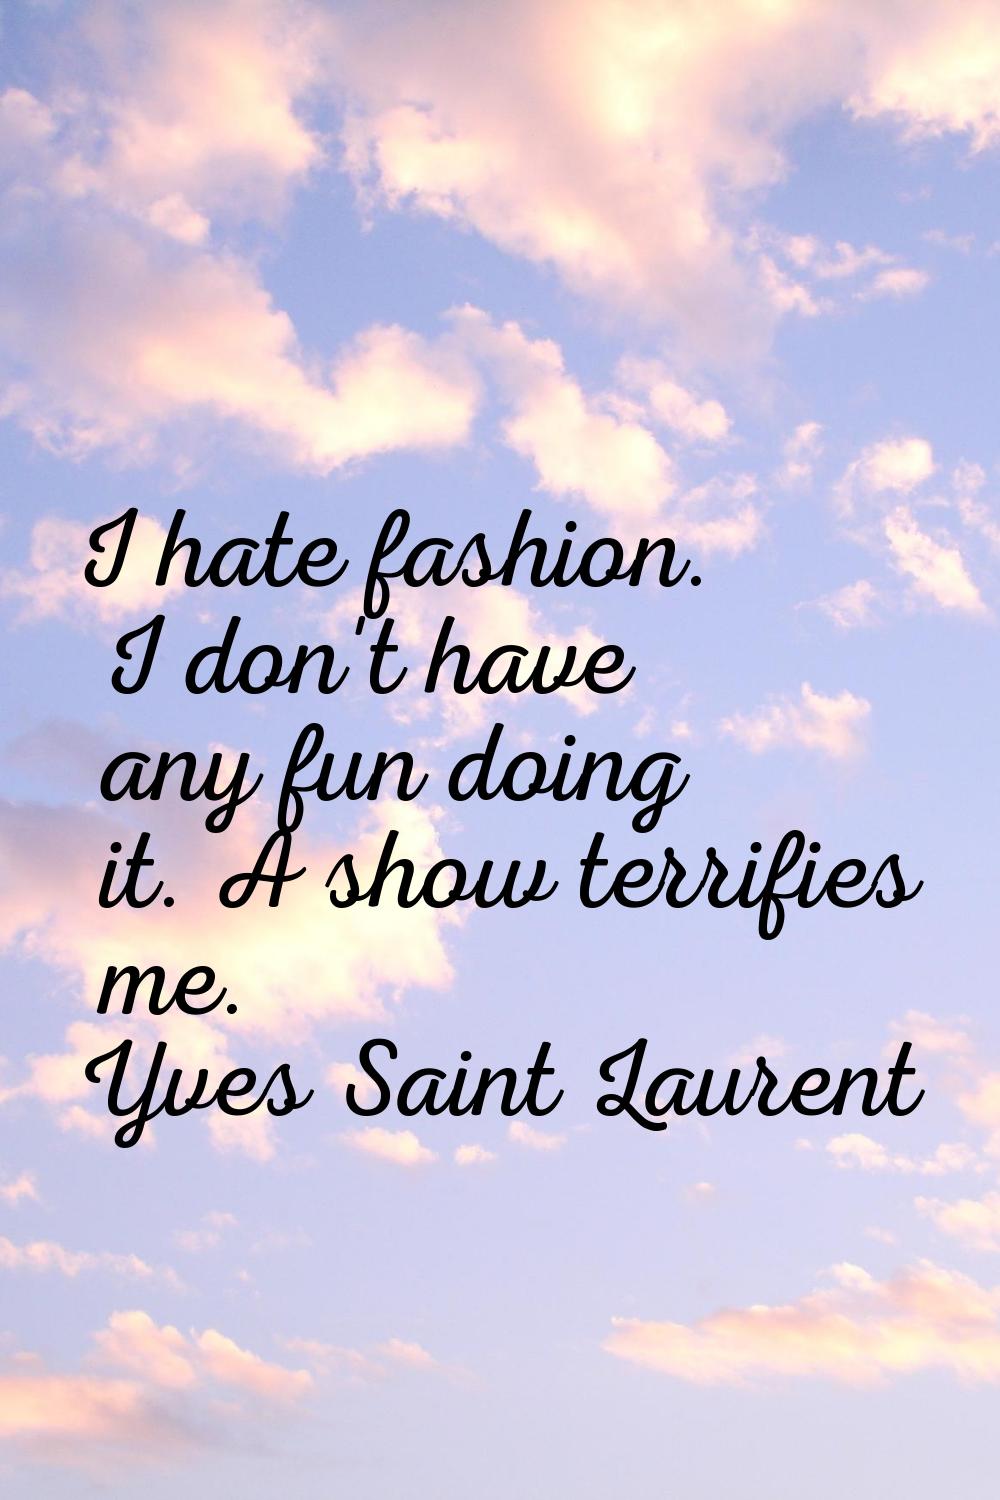 I hate fashion. I don't have any fun doing it. A show terrifies me.